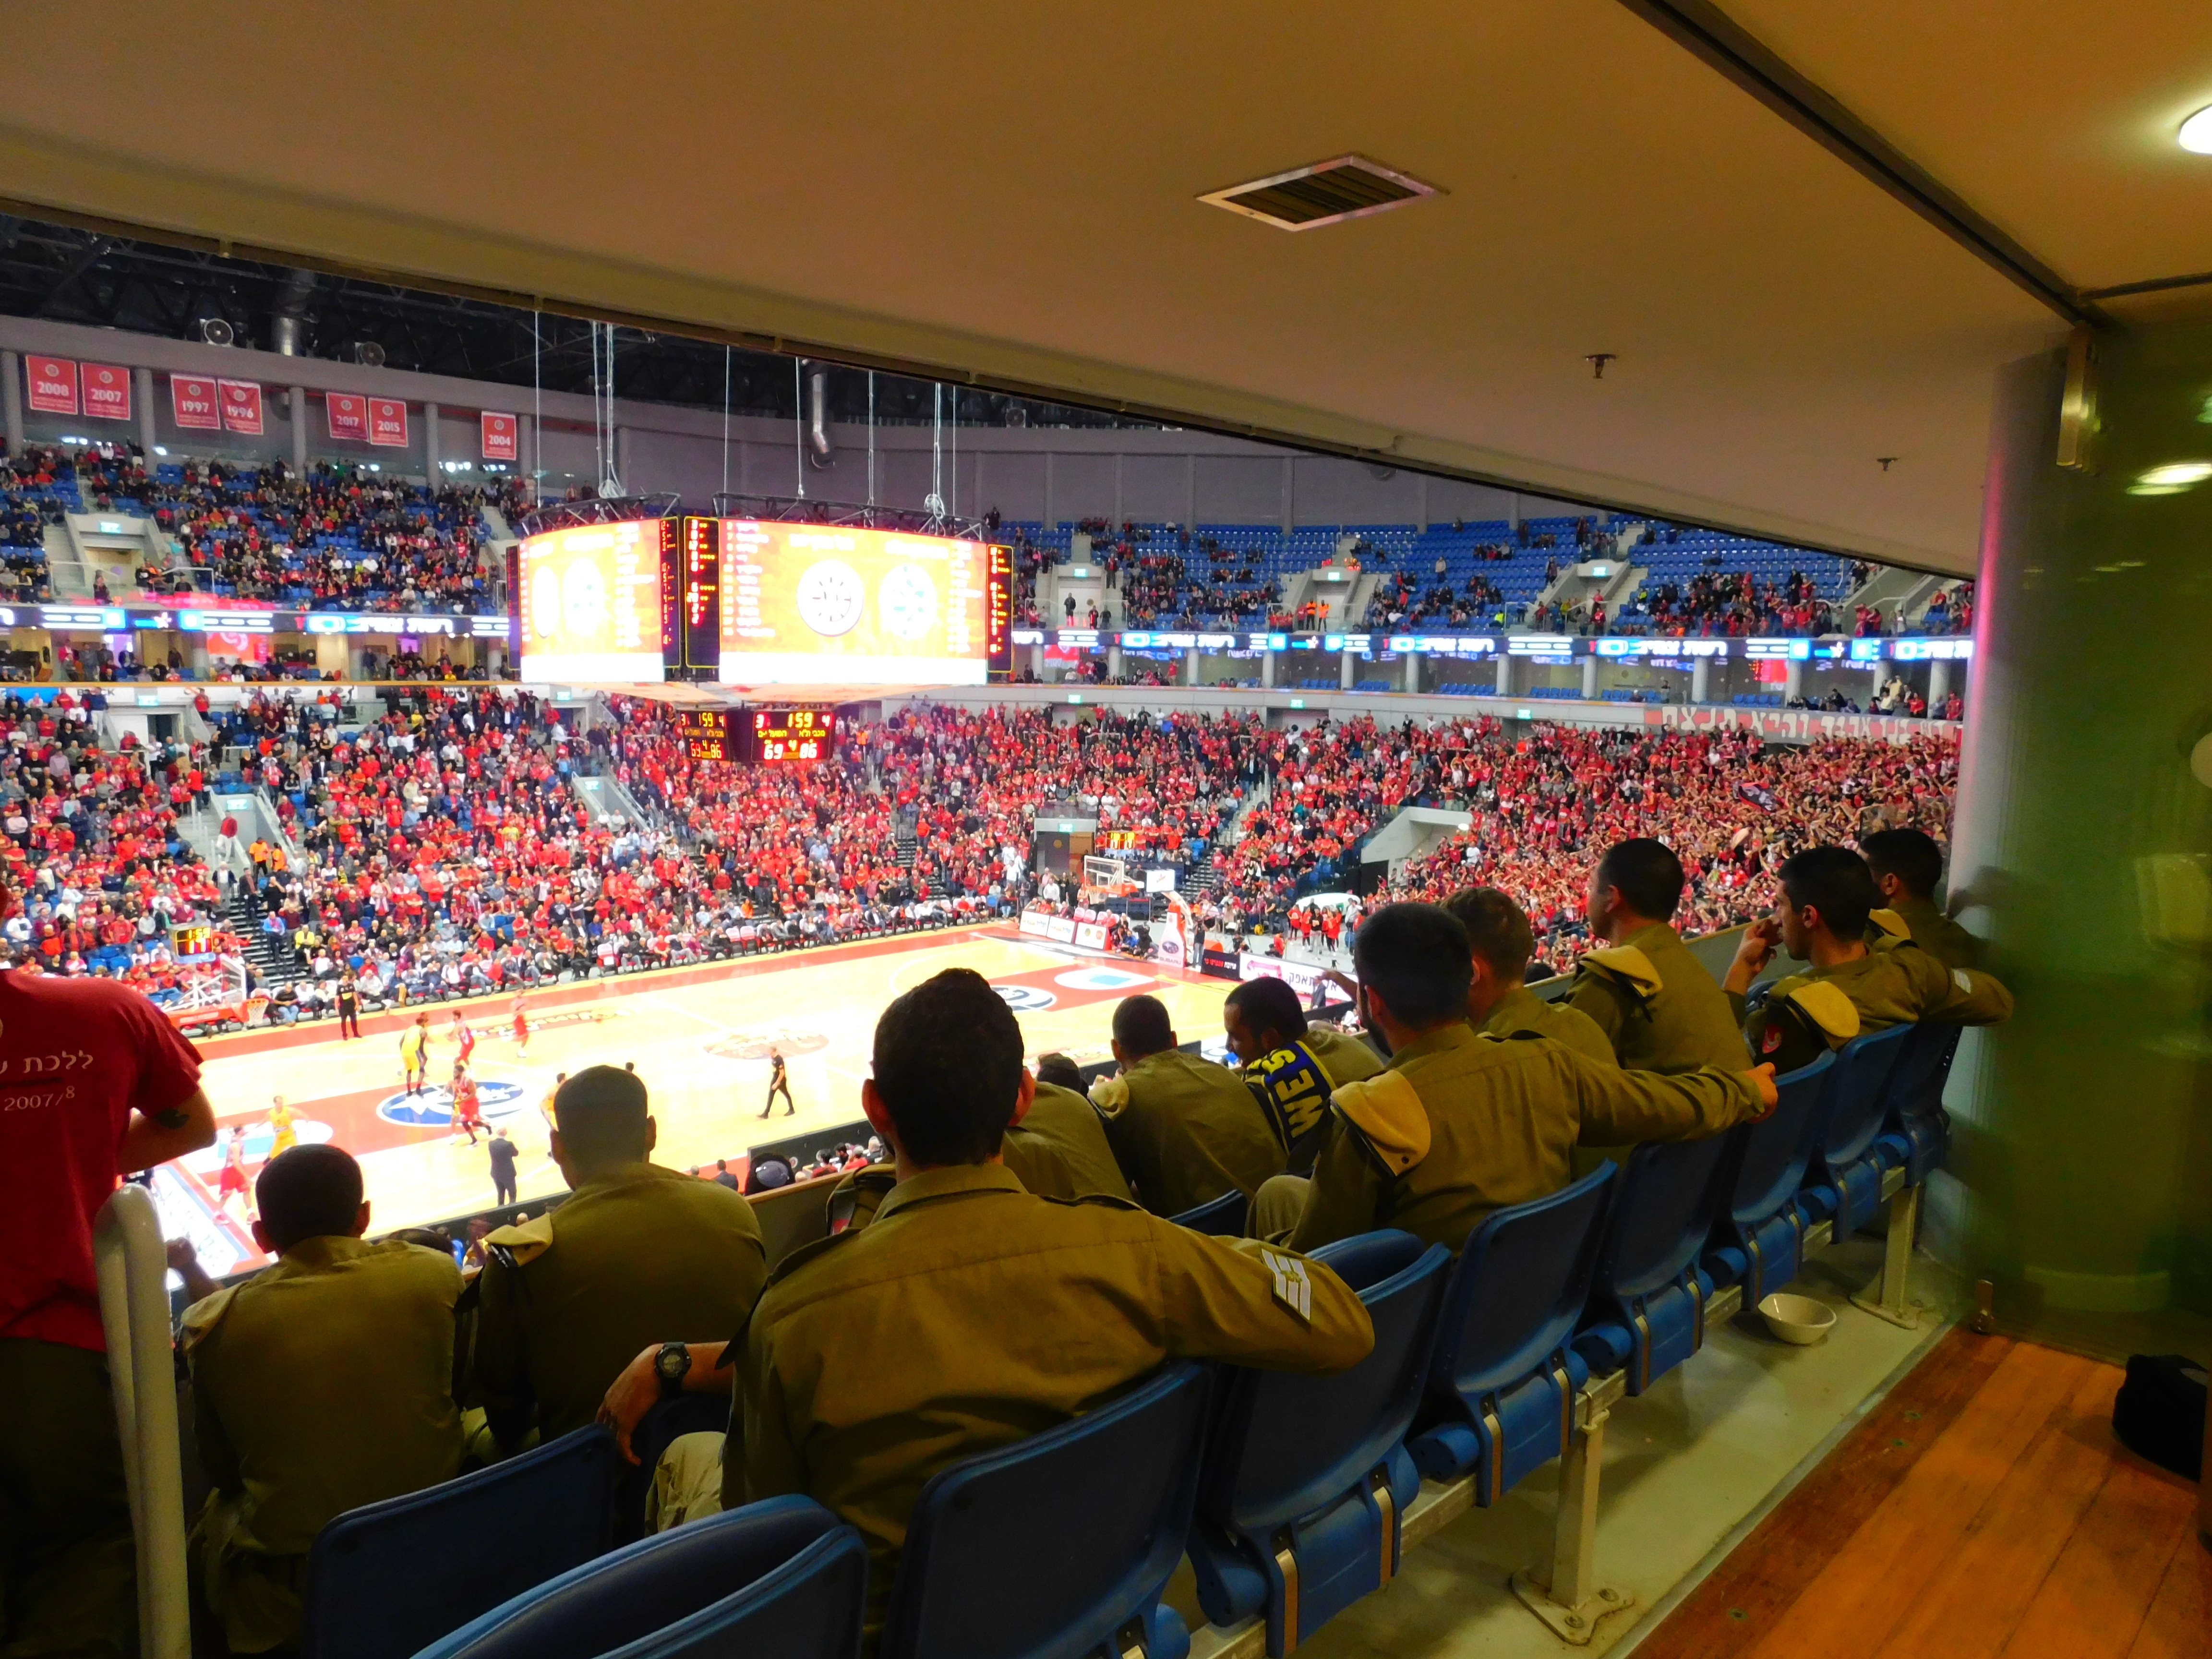 A group of IDF soldiers enjoy watching a basketball game.